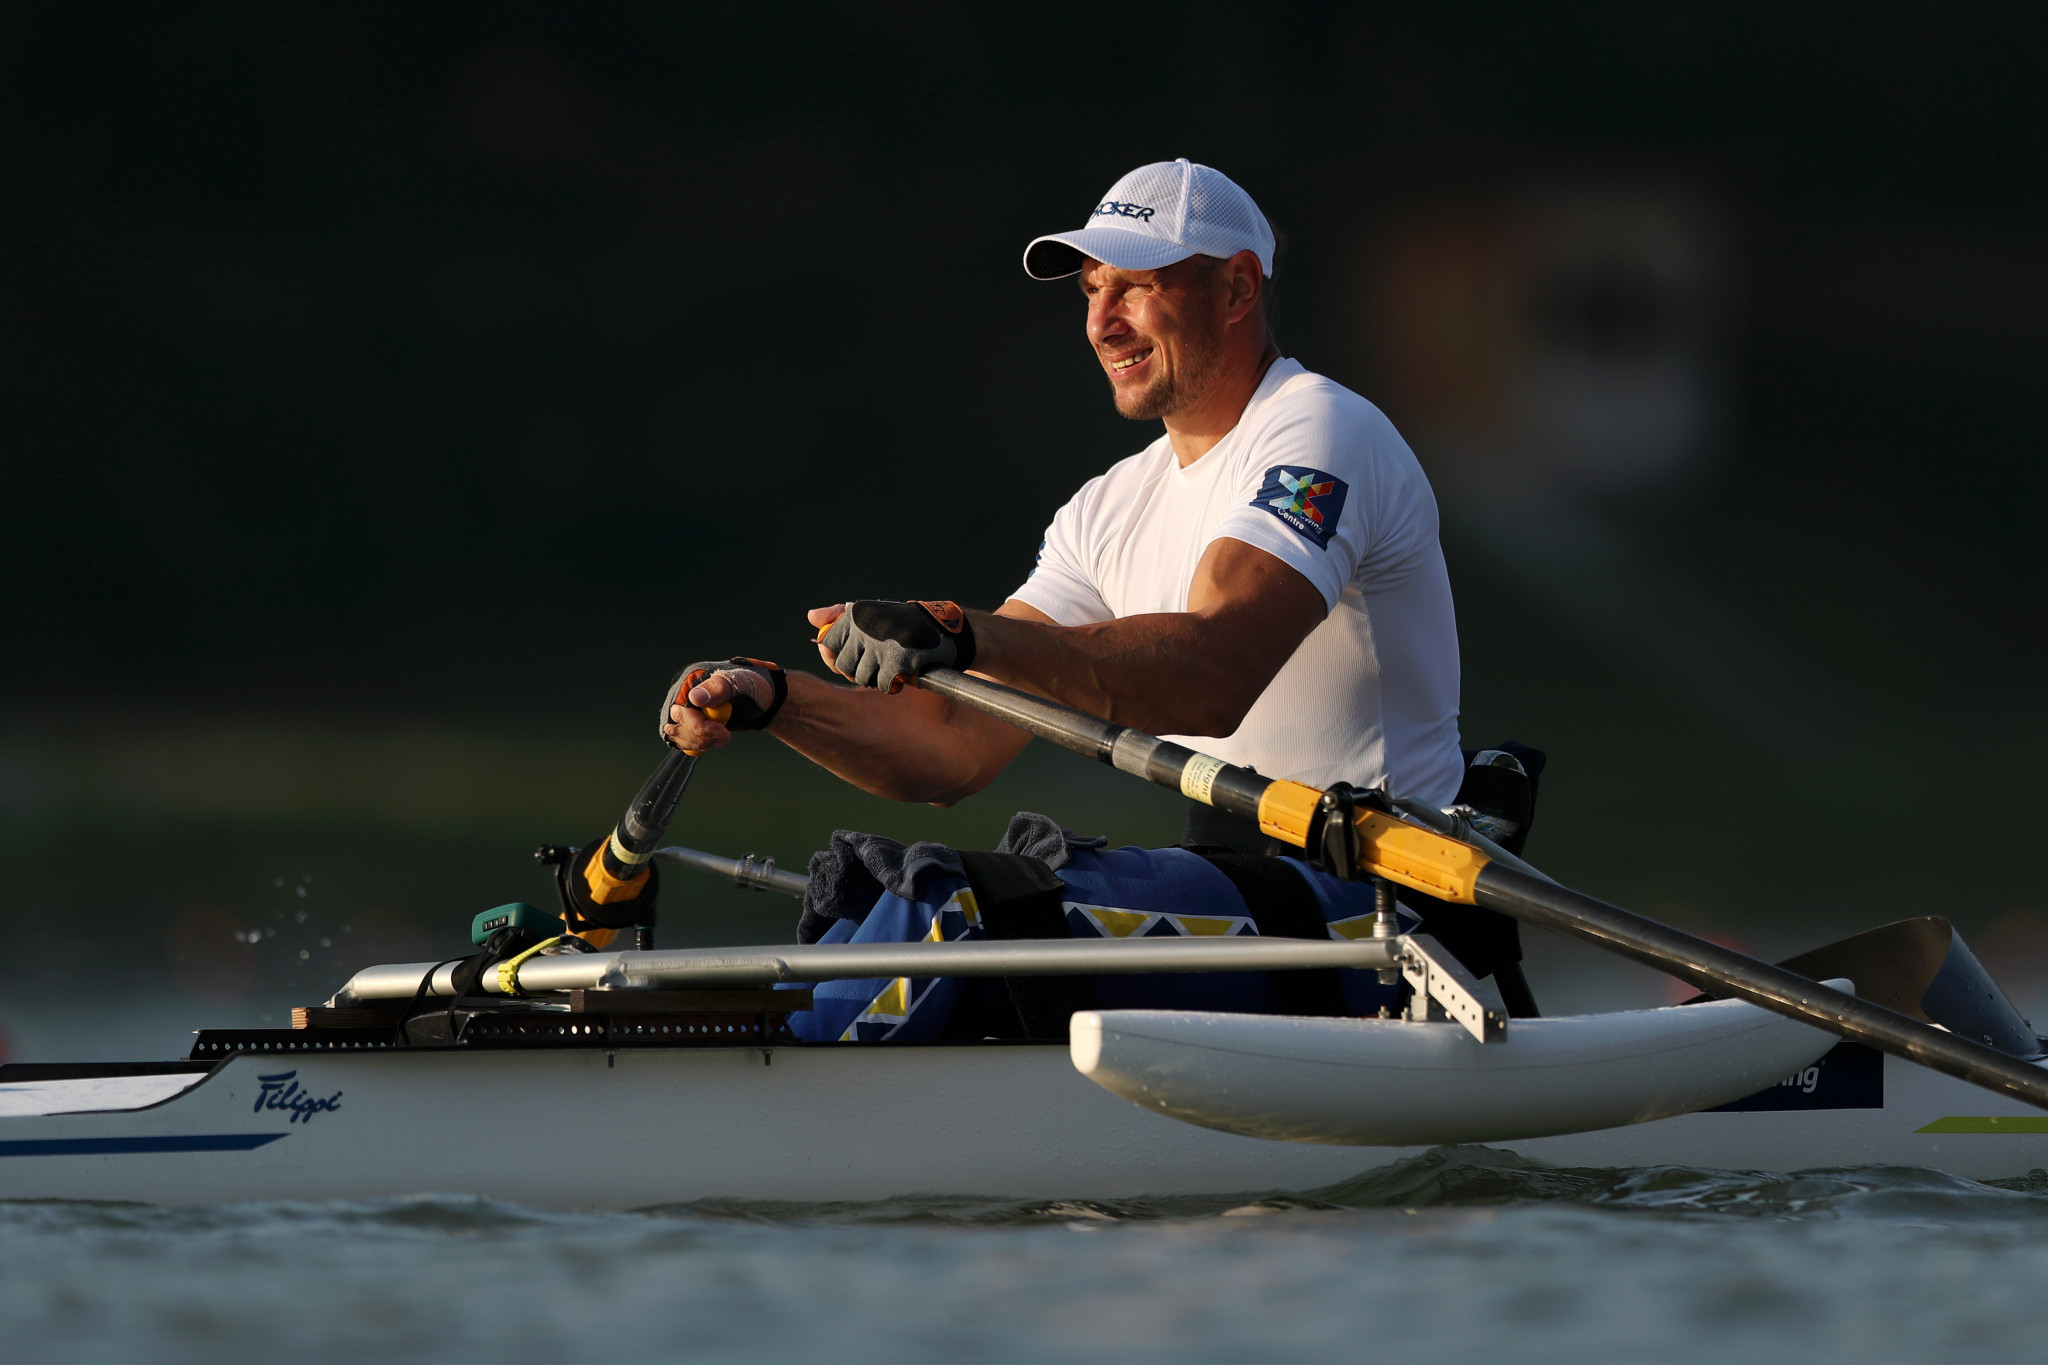 Paris 2024 rowing venue stages test event featuring Paralympic medallists